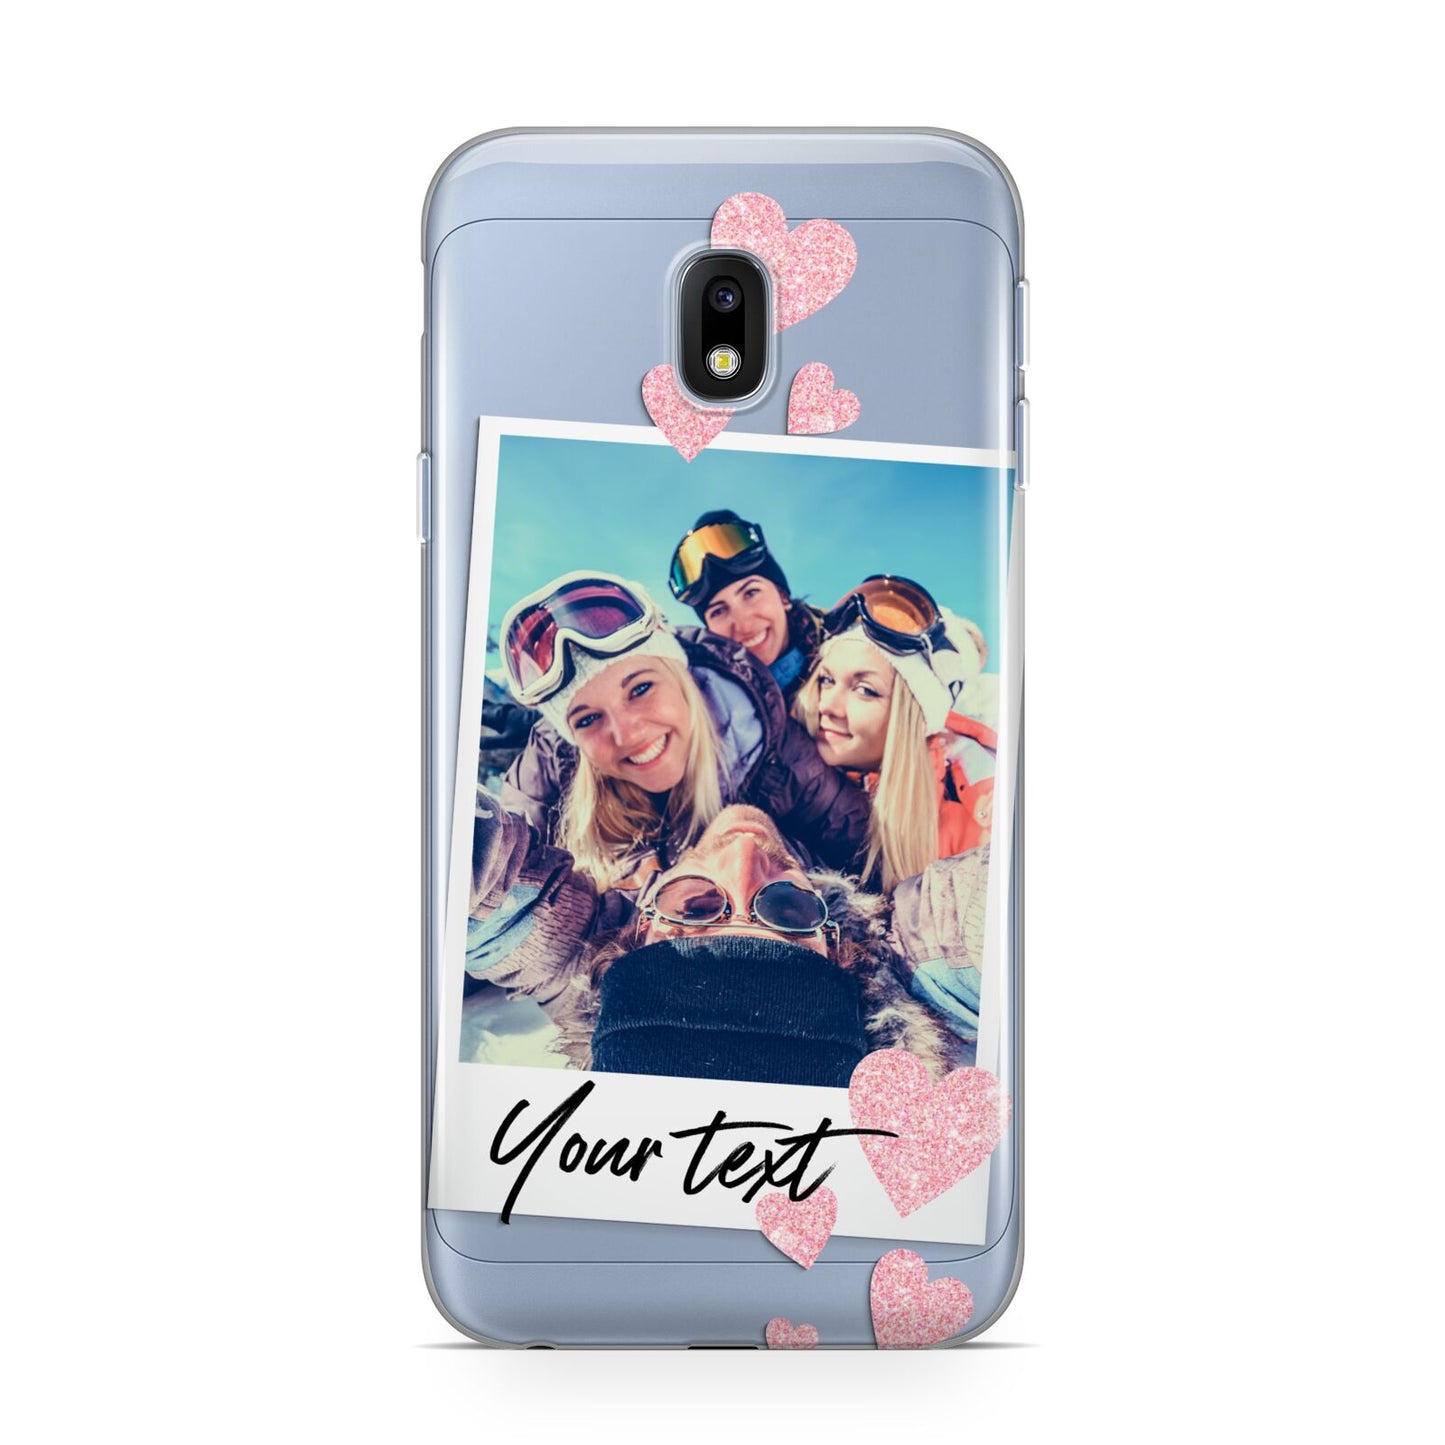 Photo with Text Samsung Galaxy J3 2017 Case